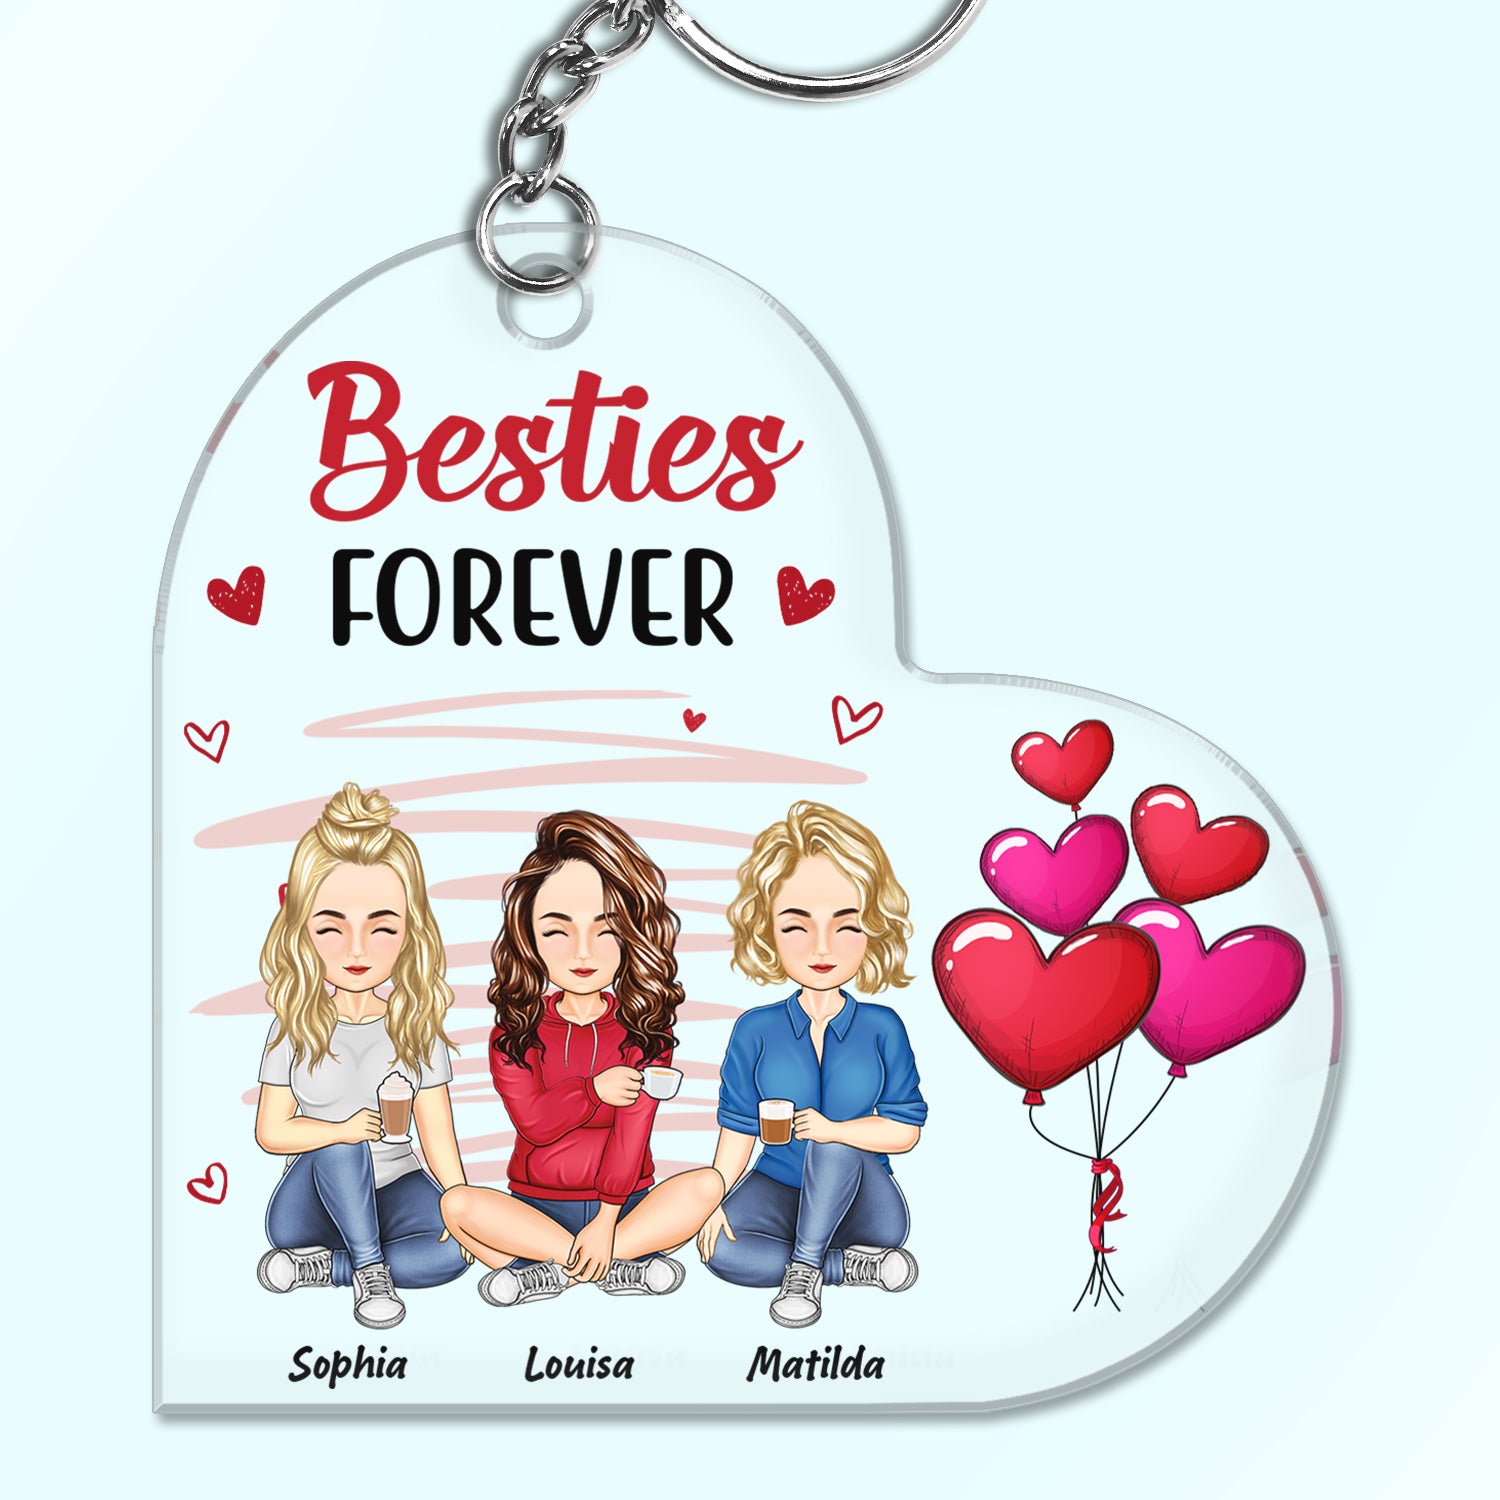 Always Sisters Besties Forever - Birthday Gifts For Best Friends, BFF, Brothers, Siblings, Colleagues - Personalized Custom Acrylic Keychain